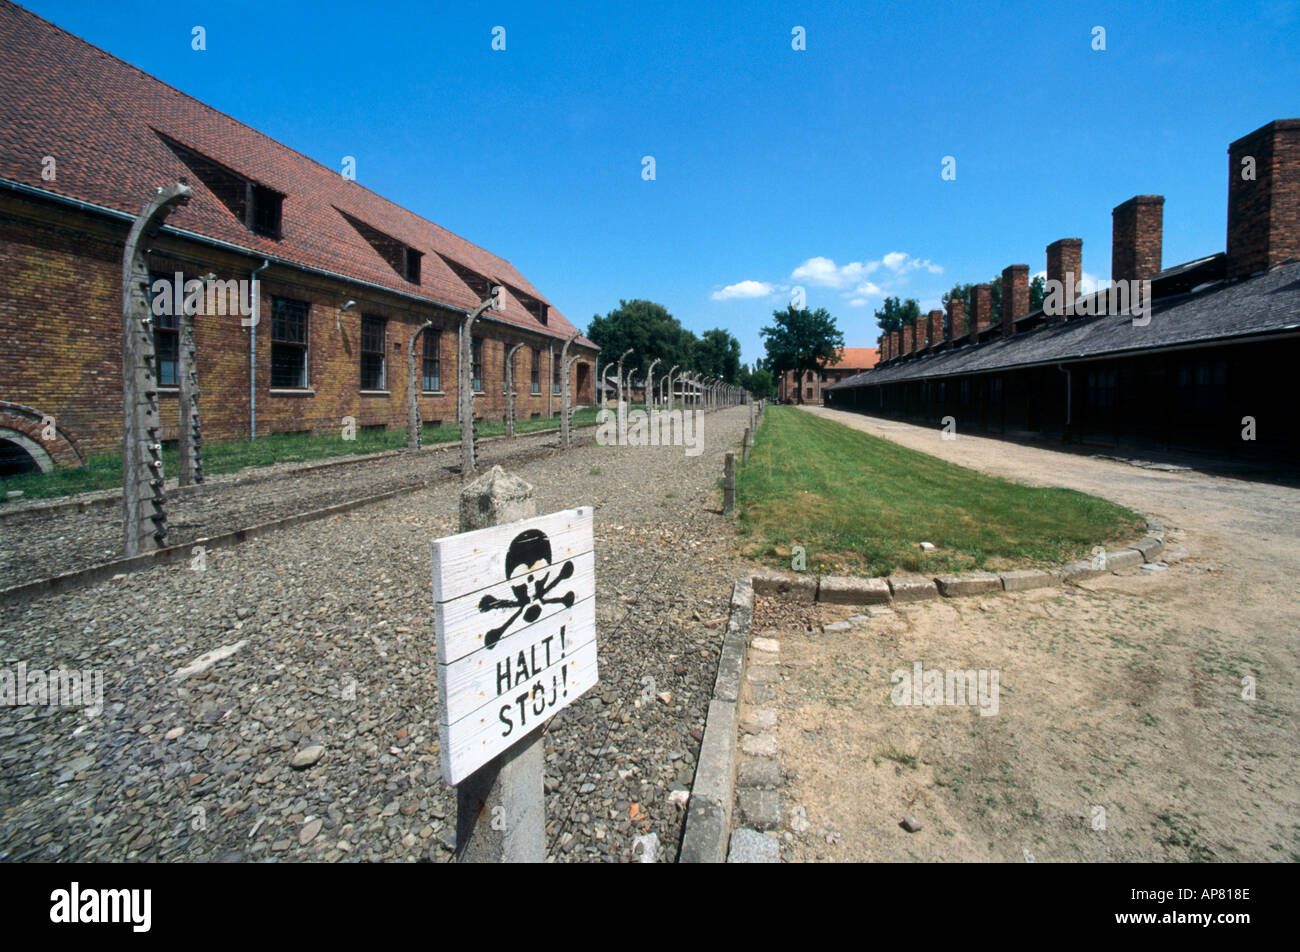 Warning sign board at auschwitz concentration camp, Poland Stock Photo